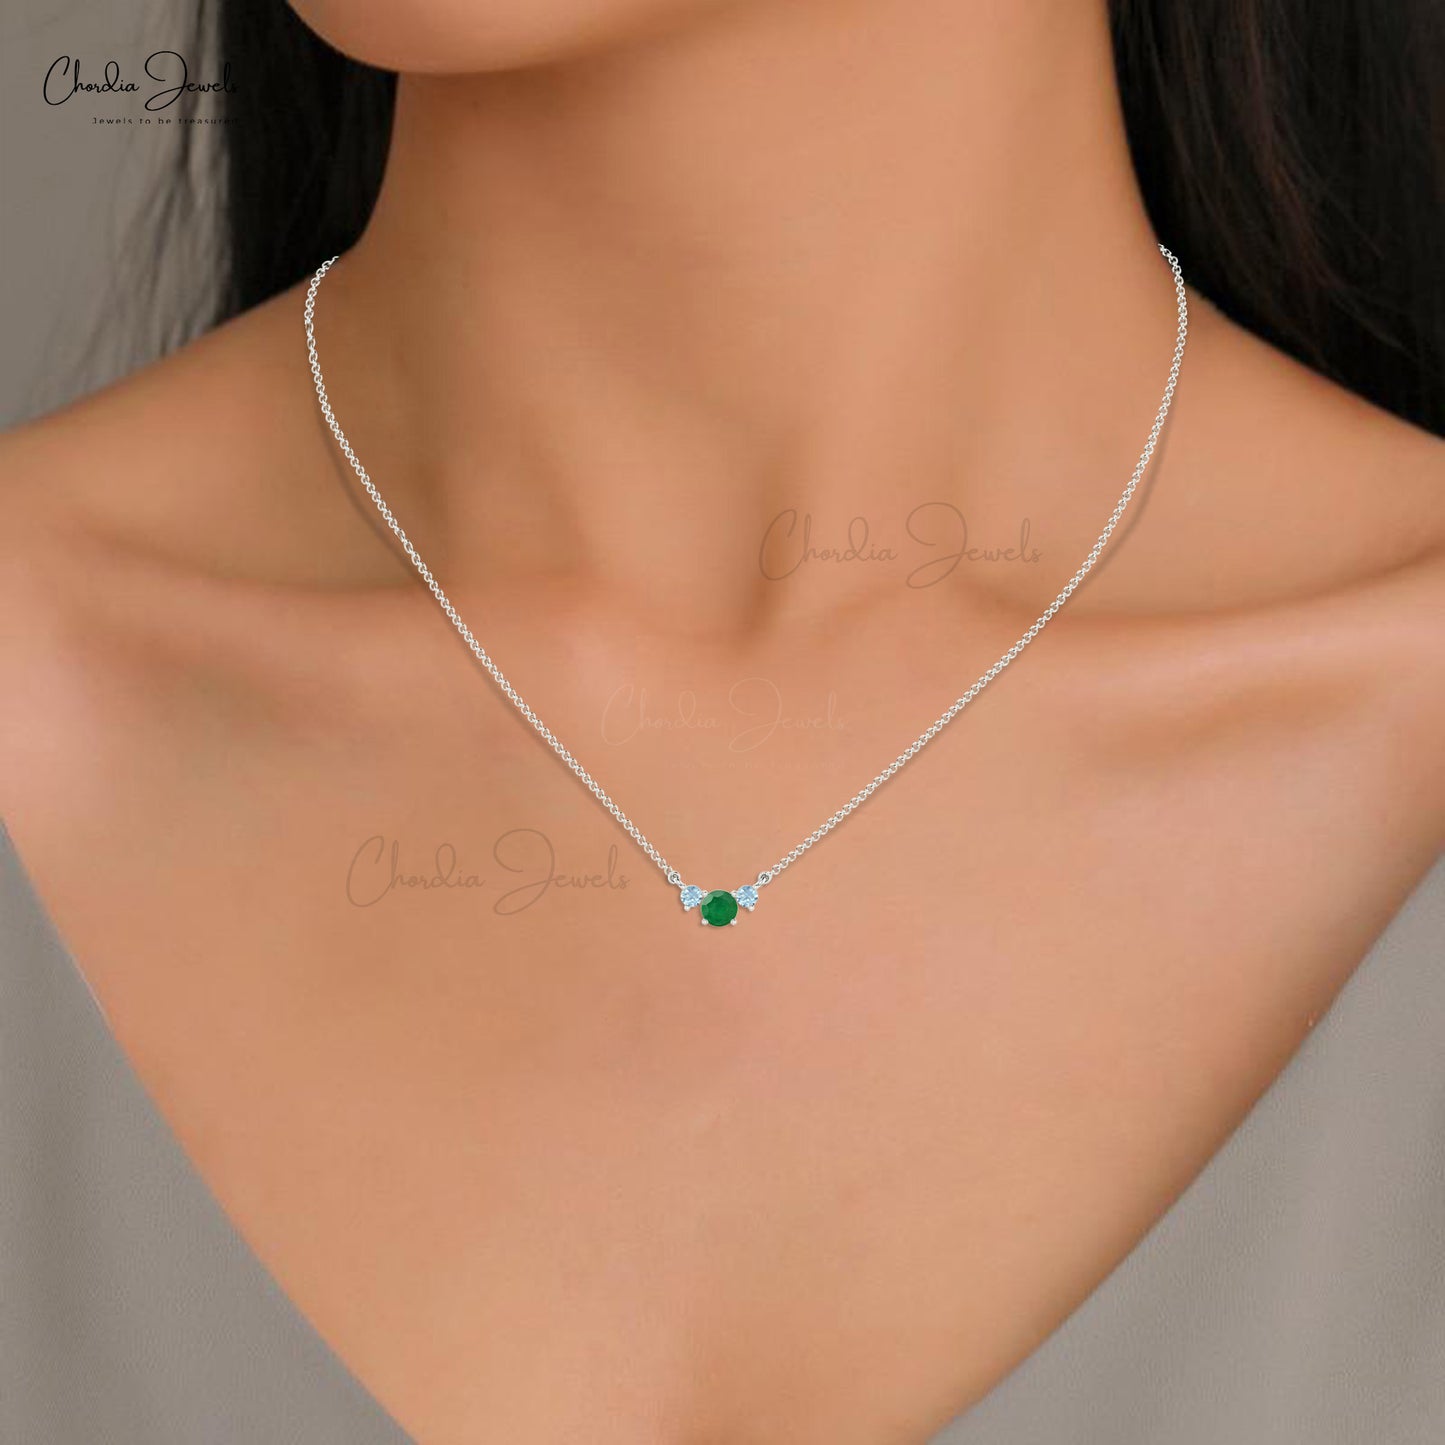 Three Stone Lavaliere Necklace Pendant With Natural Emerald and Aquamarine in Real 14k Gold Gorgeous Gift for Wife